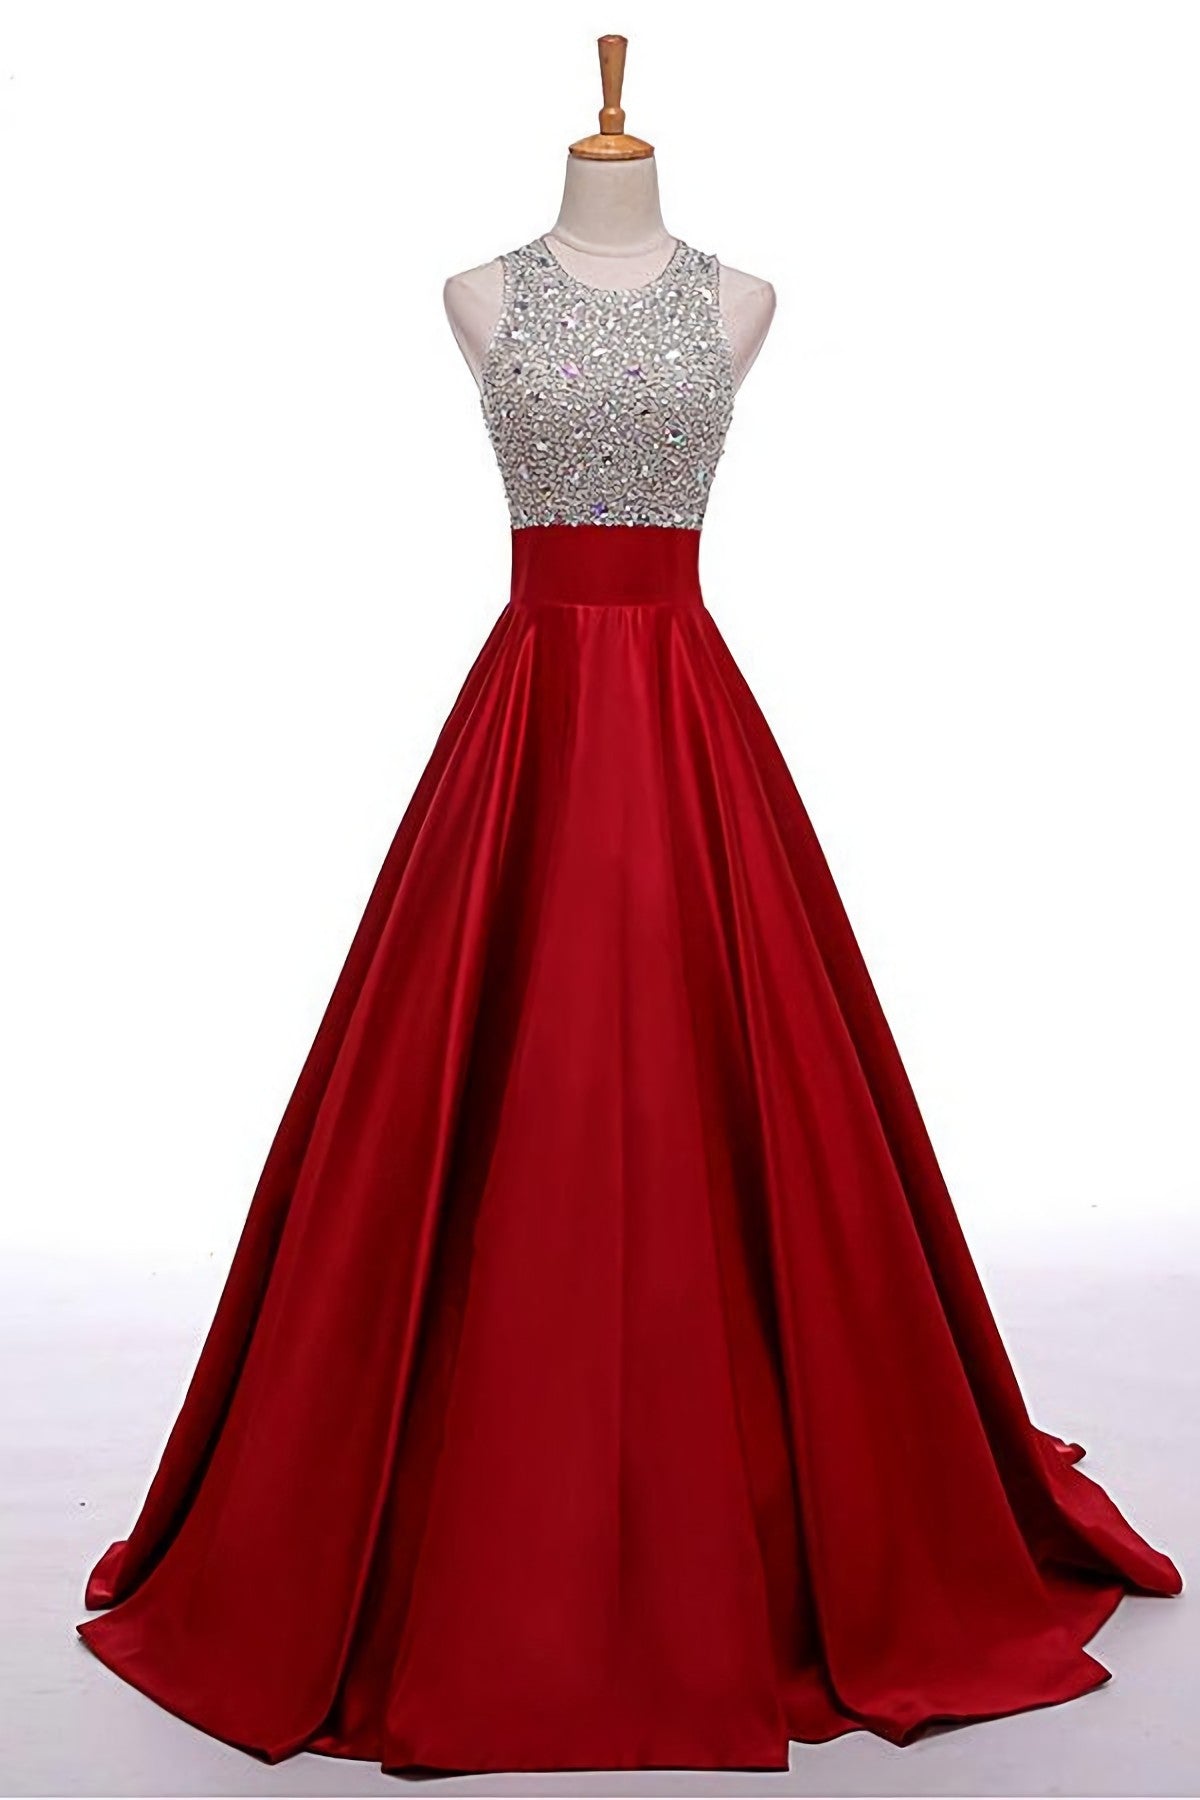 Bridesmaid Dresses Pinks, High Low Beaded Red Beautiful Simple Cheap Modest Prom Dresses